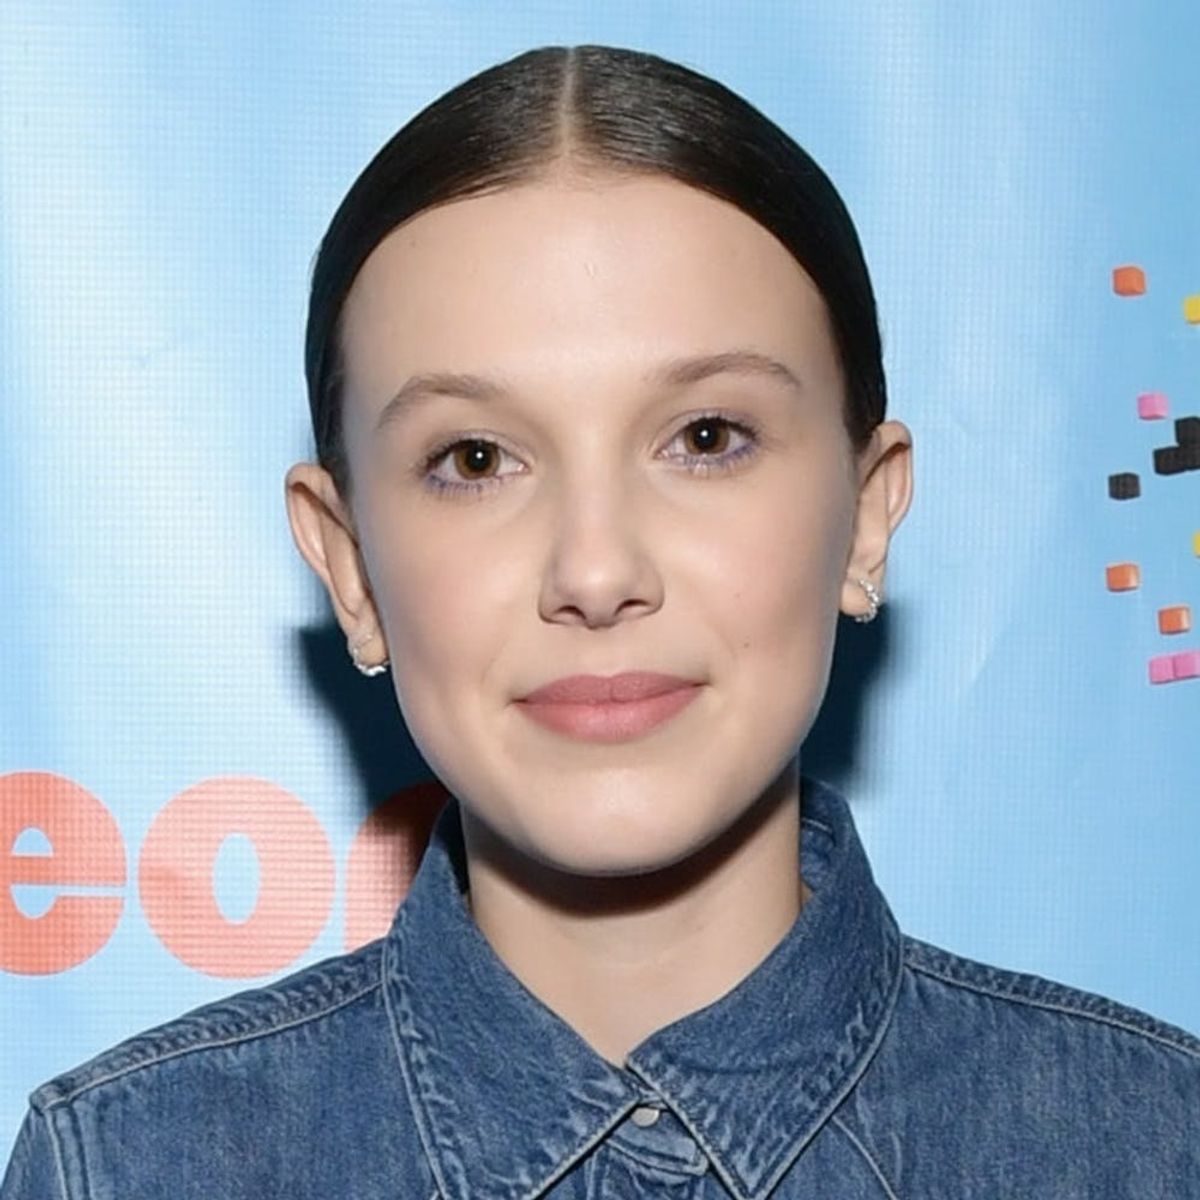 Millie Bobby Brown’s 2018 Kids’ Choice Awards Look Was a Heartwarming Tribute to Parkland Victims